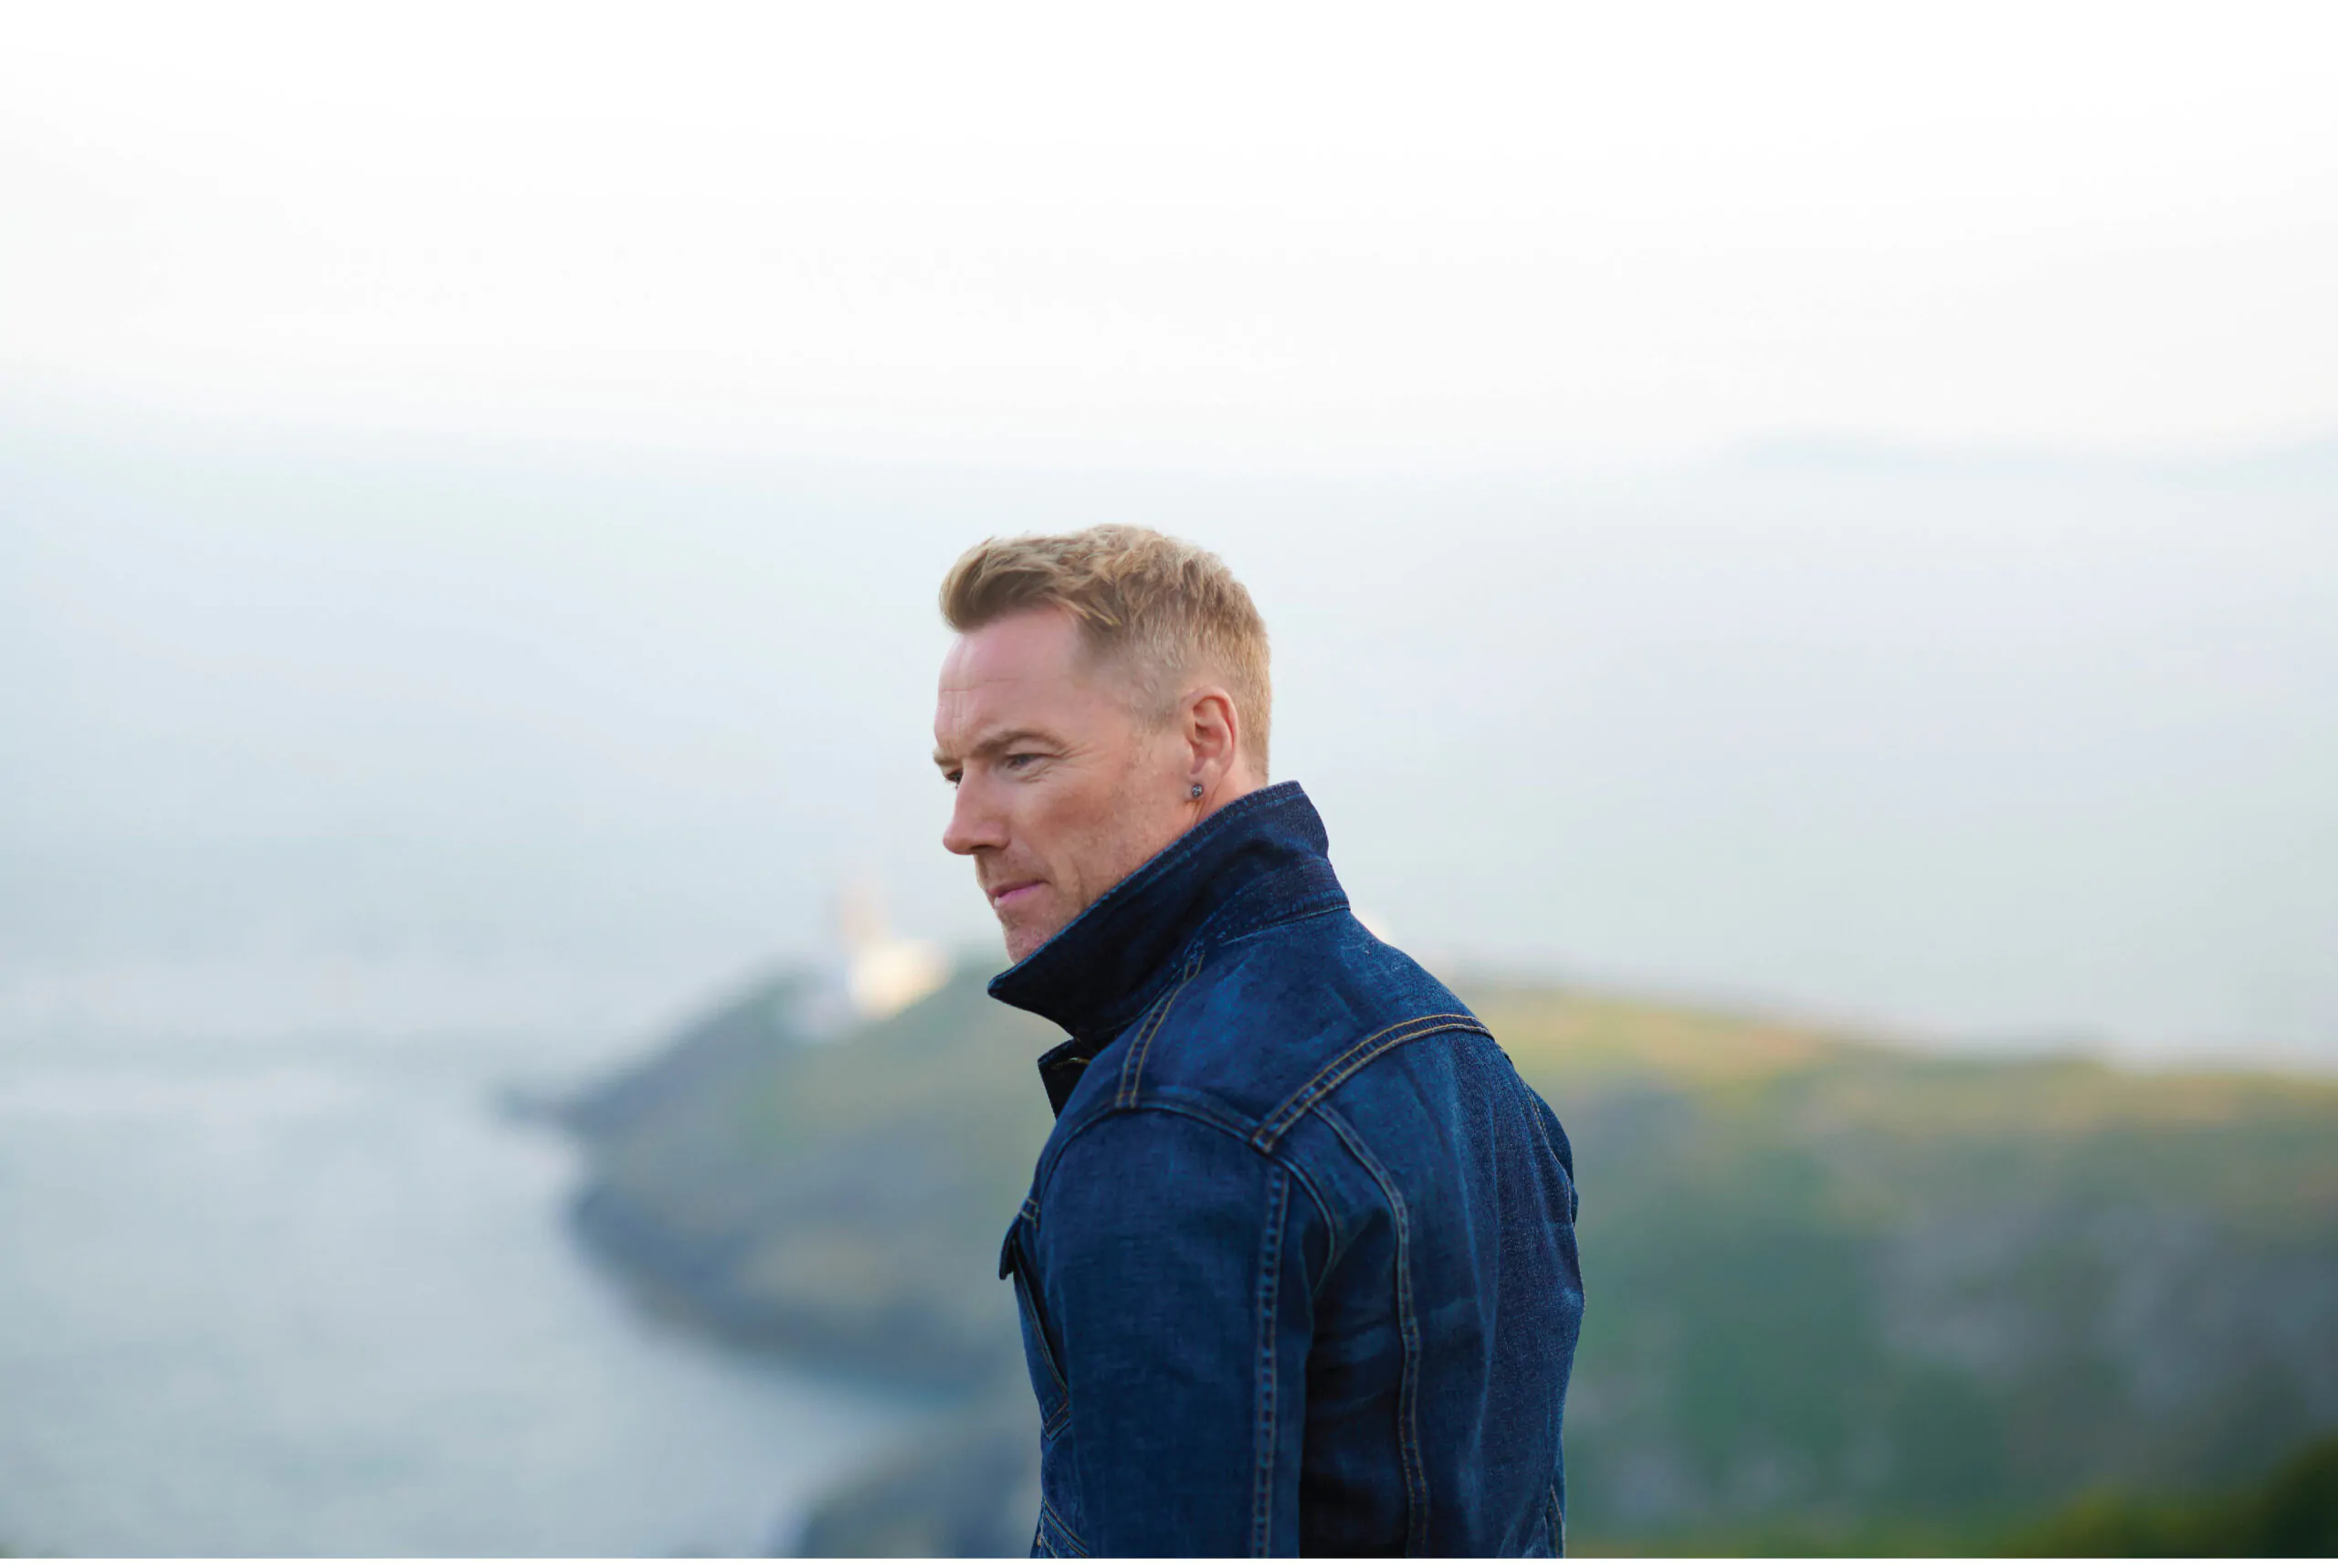 RONAN KEATING journeys through Ireland’s musical heritage with new album, Songs From Home